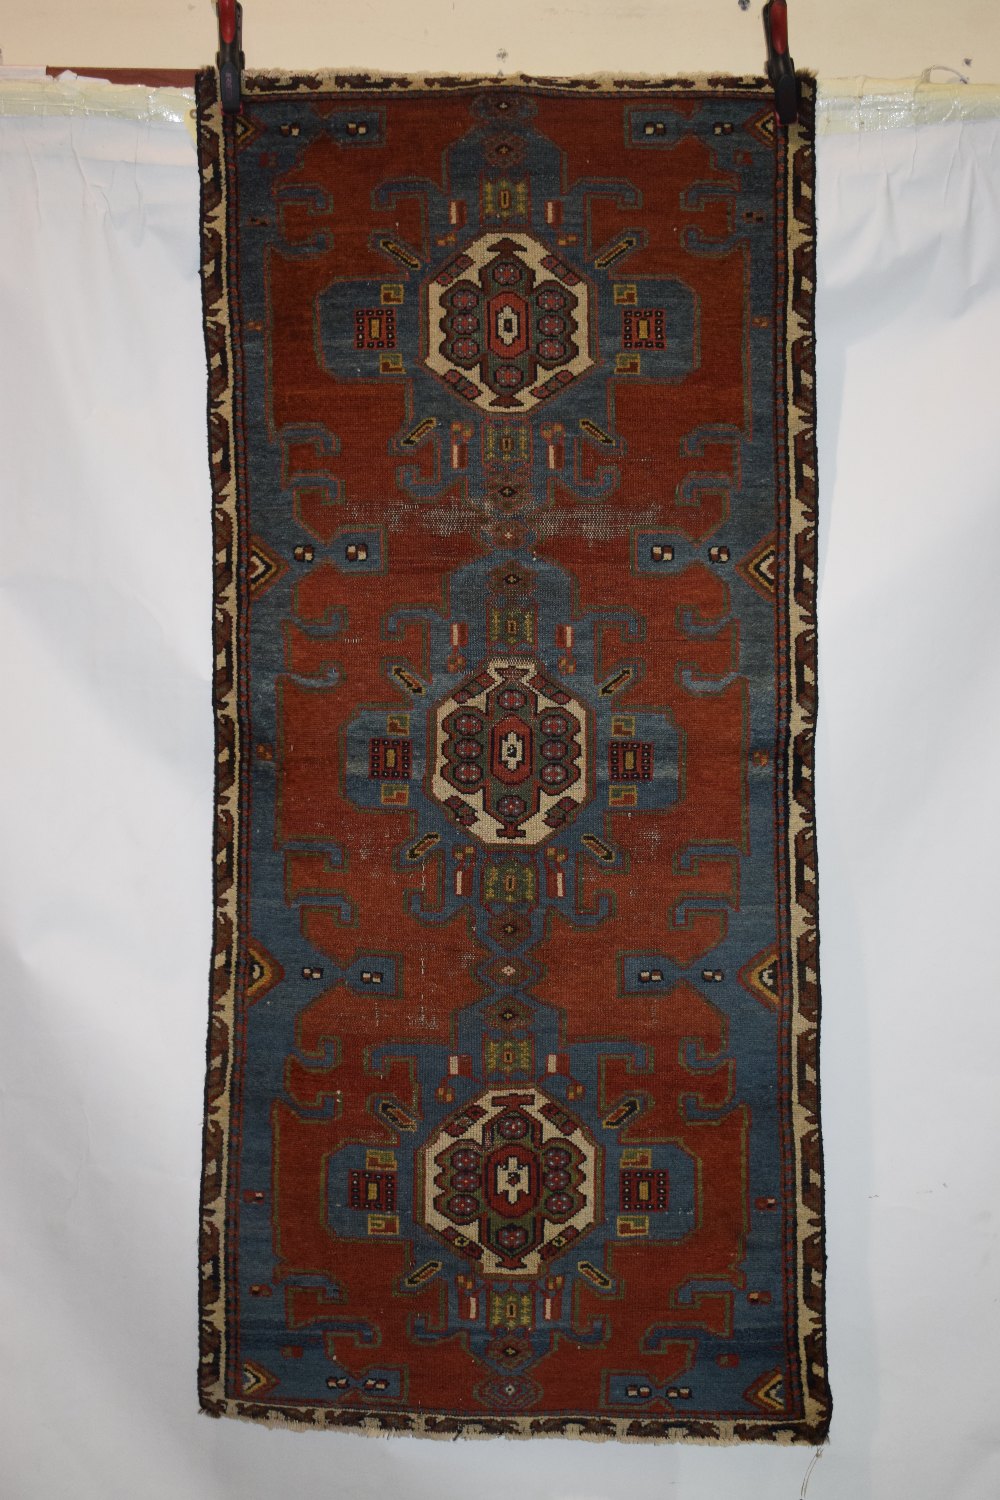 North west Persian rug fragment, circa 1930s, 6ft. 2in. x 2ft. 9in. 1.88m. x 0.84m. Reduced on all